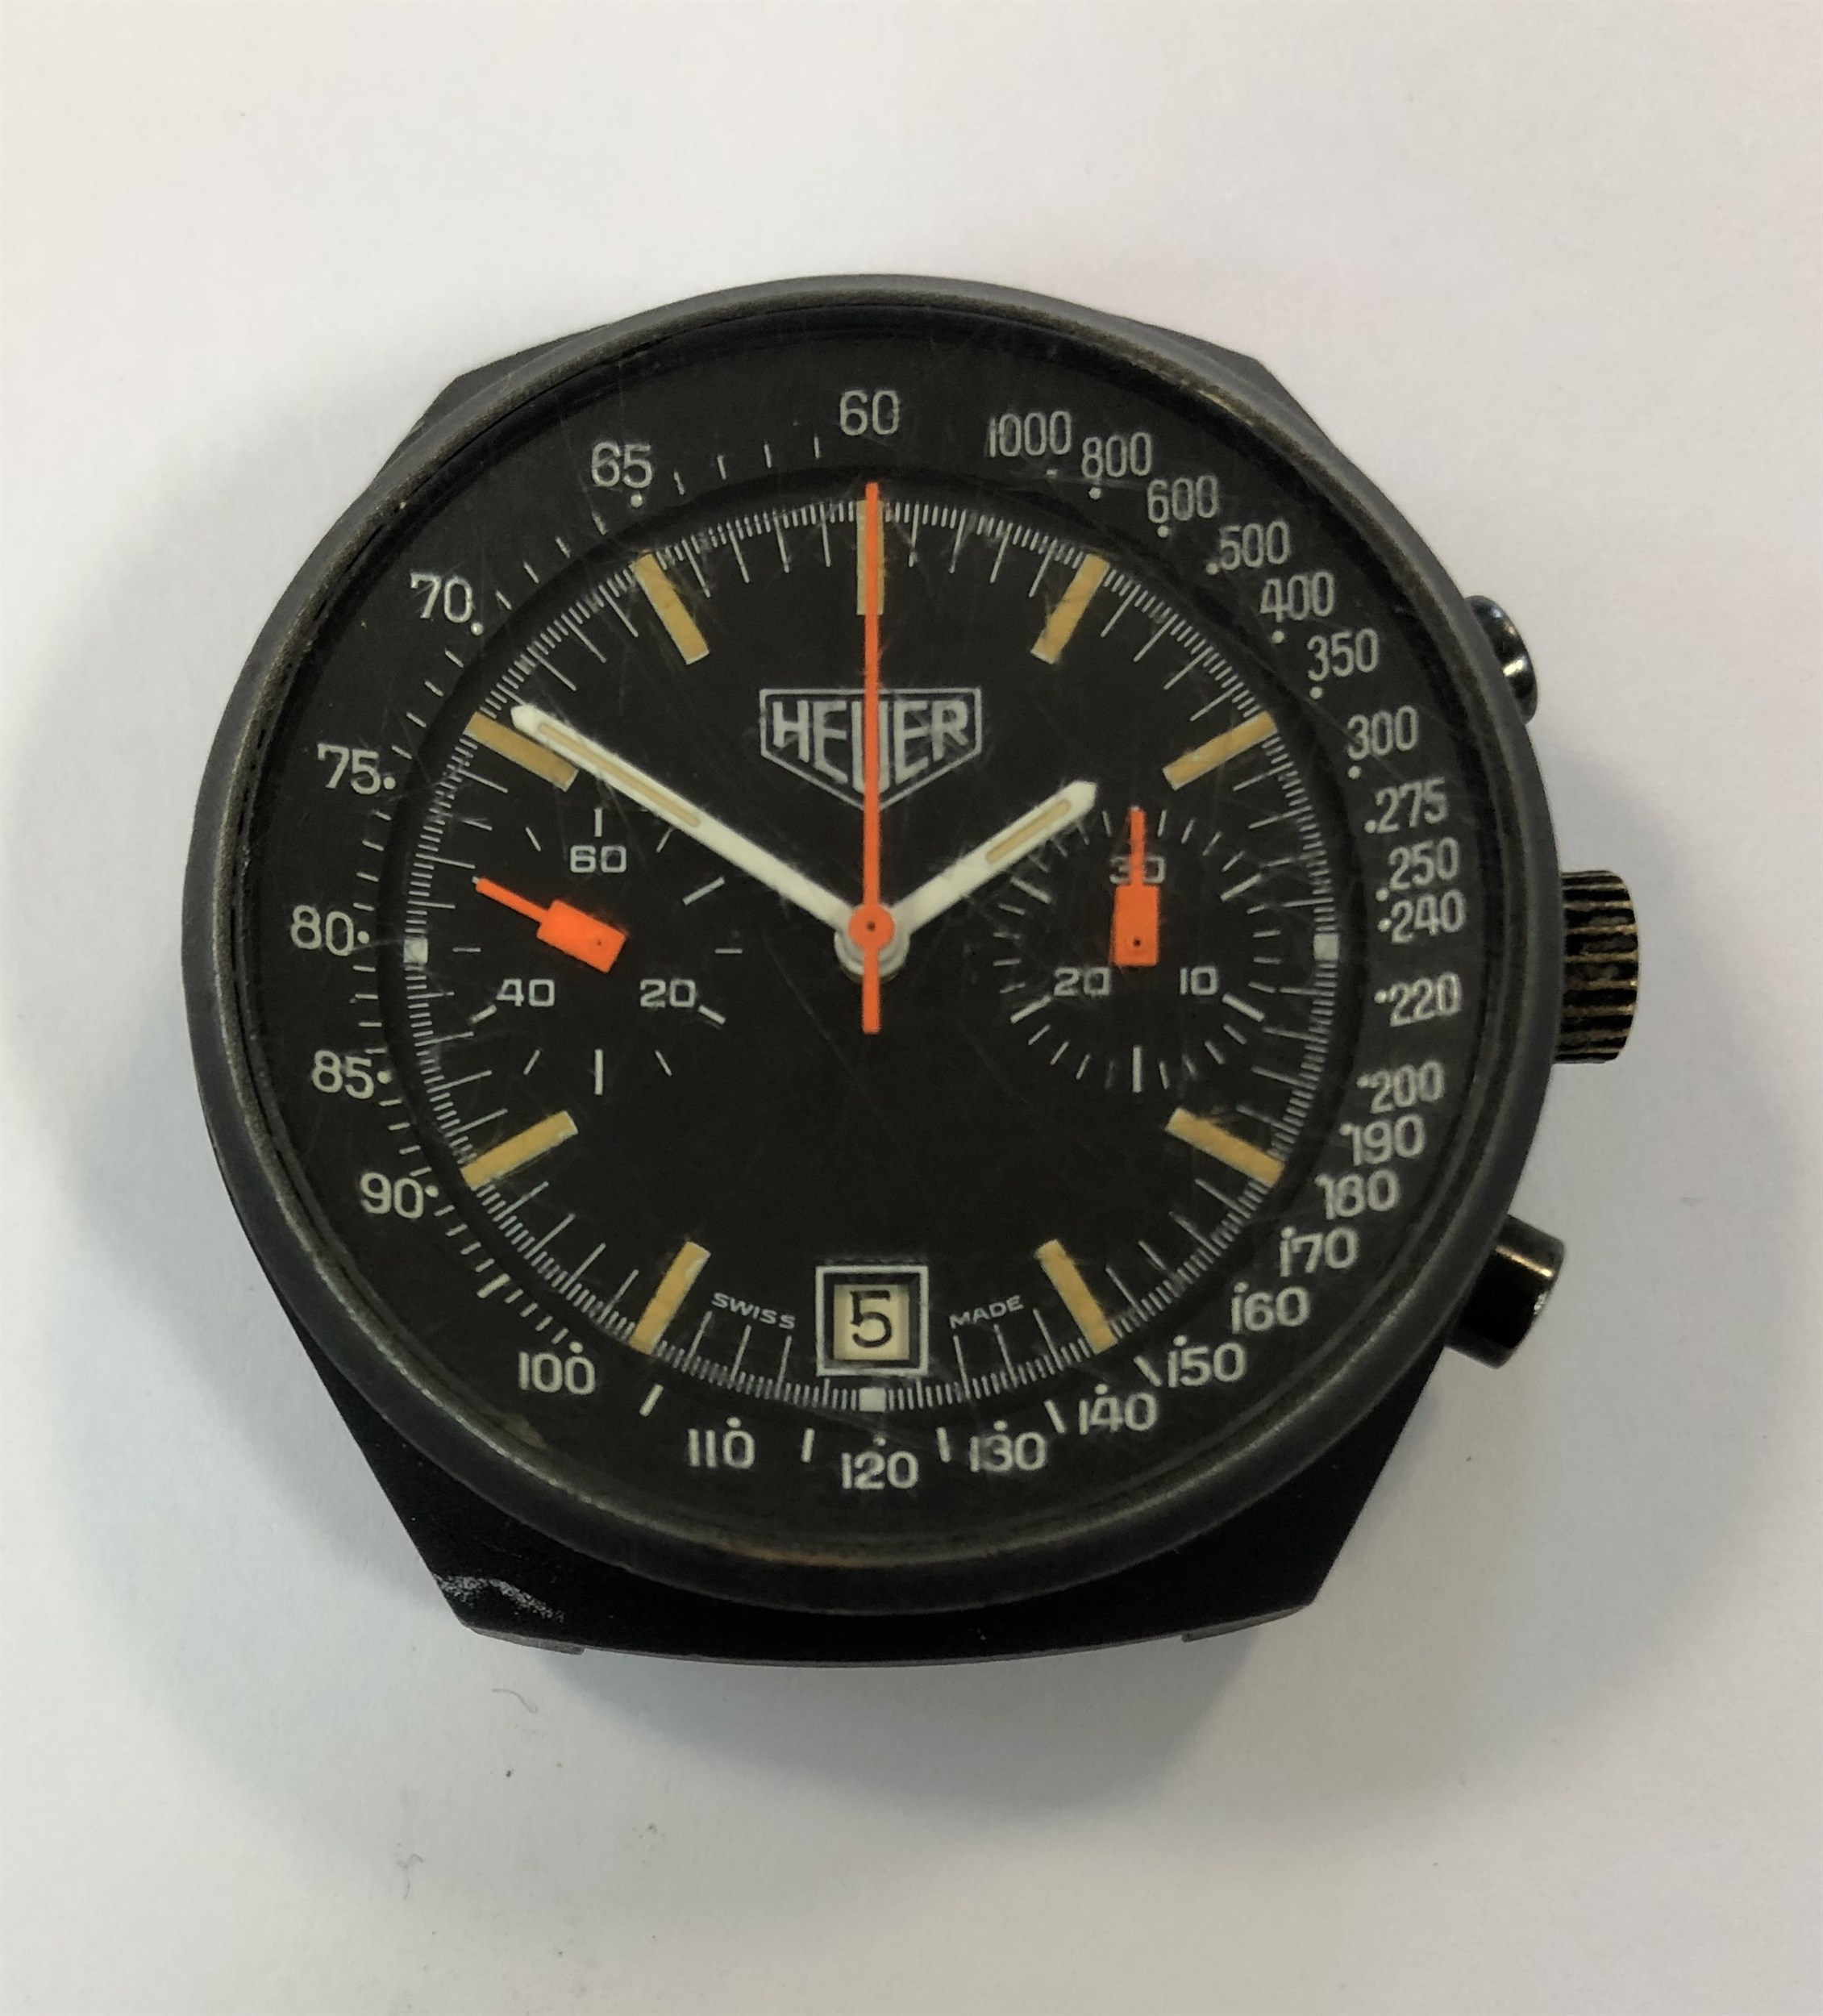 Heuer - A gentleman's rare PVD coated stainless steel chronograph watch head,